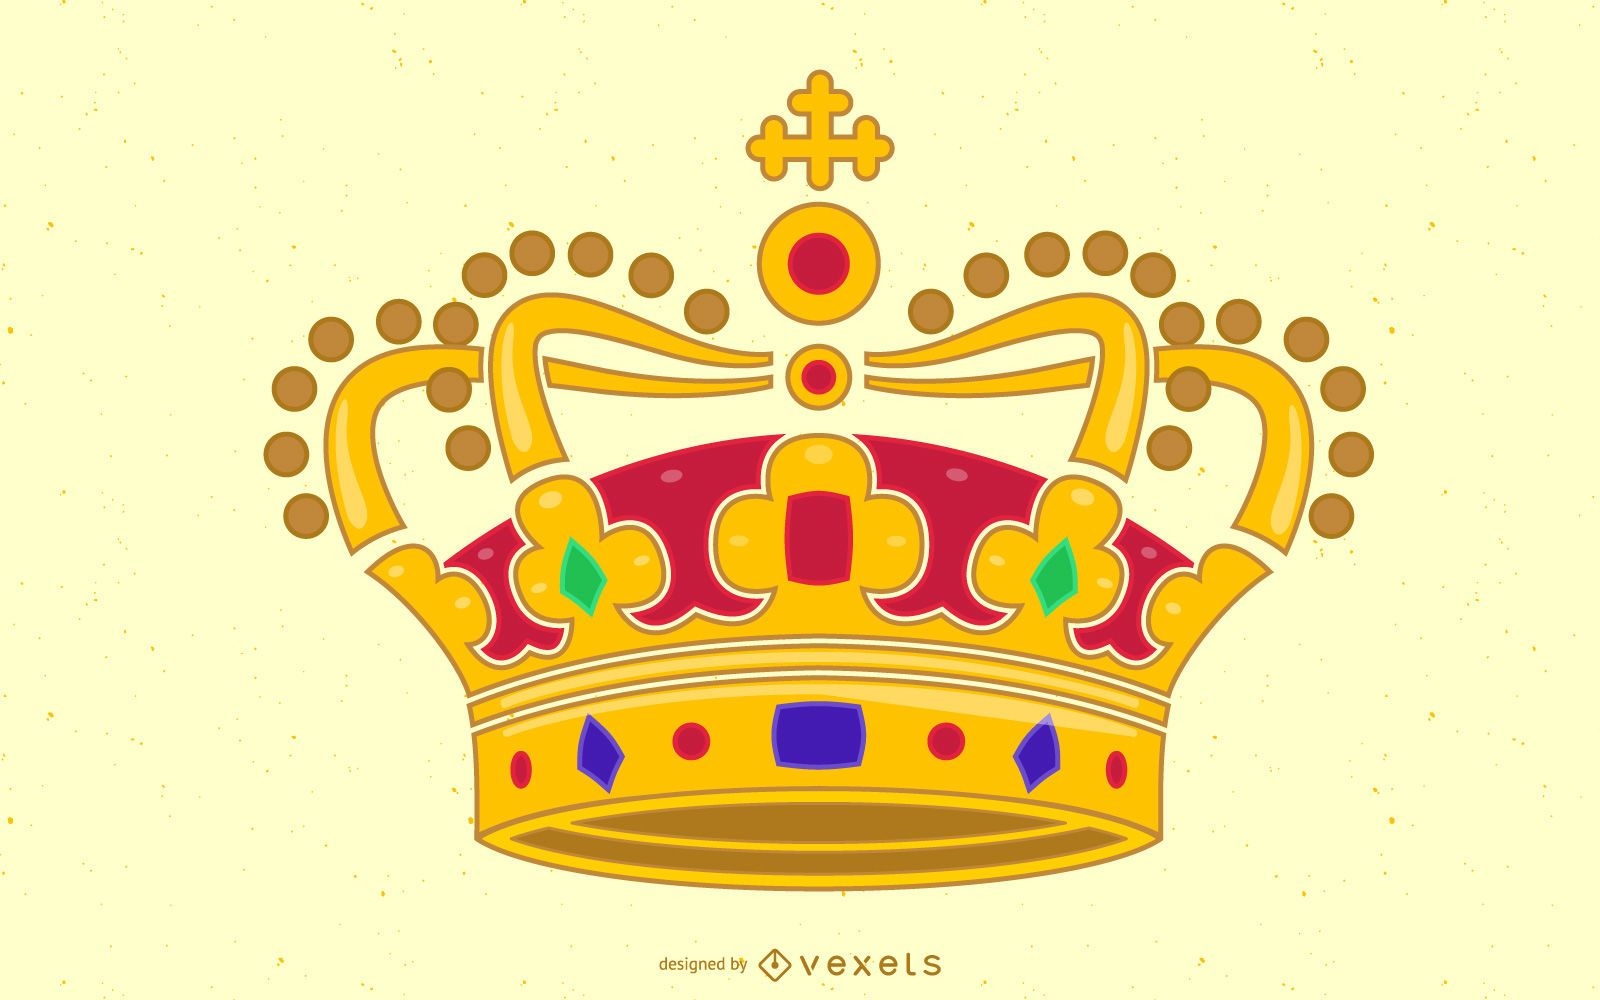 Gold Crown PNG Transparent Images Free Download - Pngfre